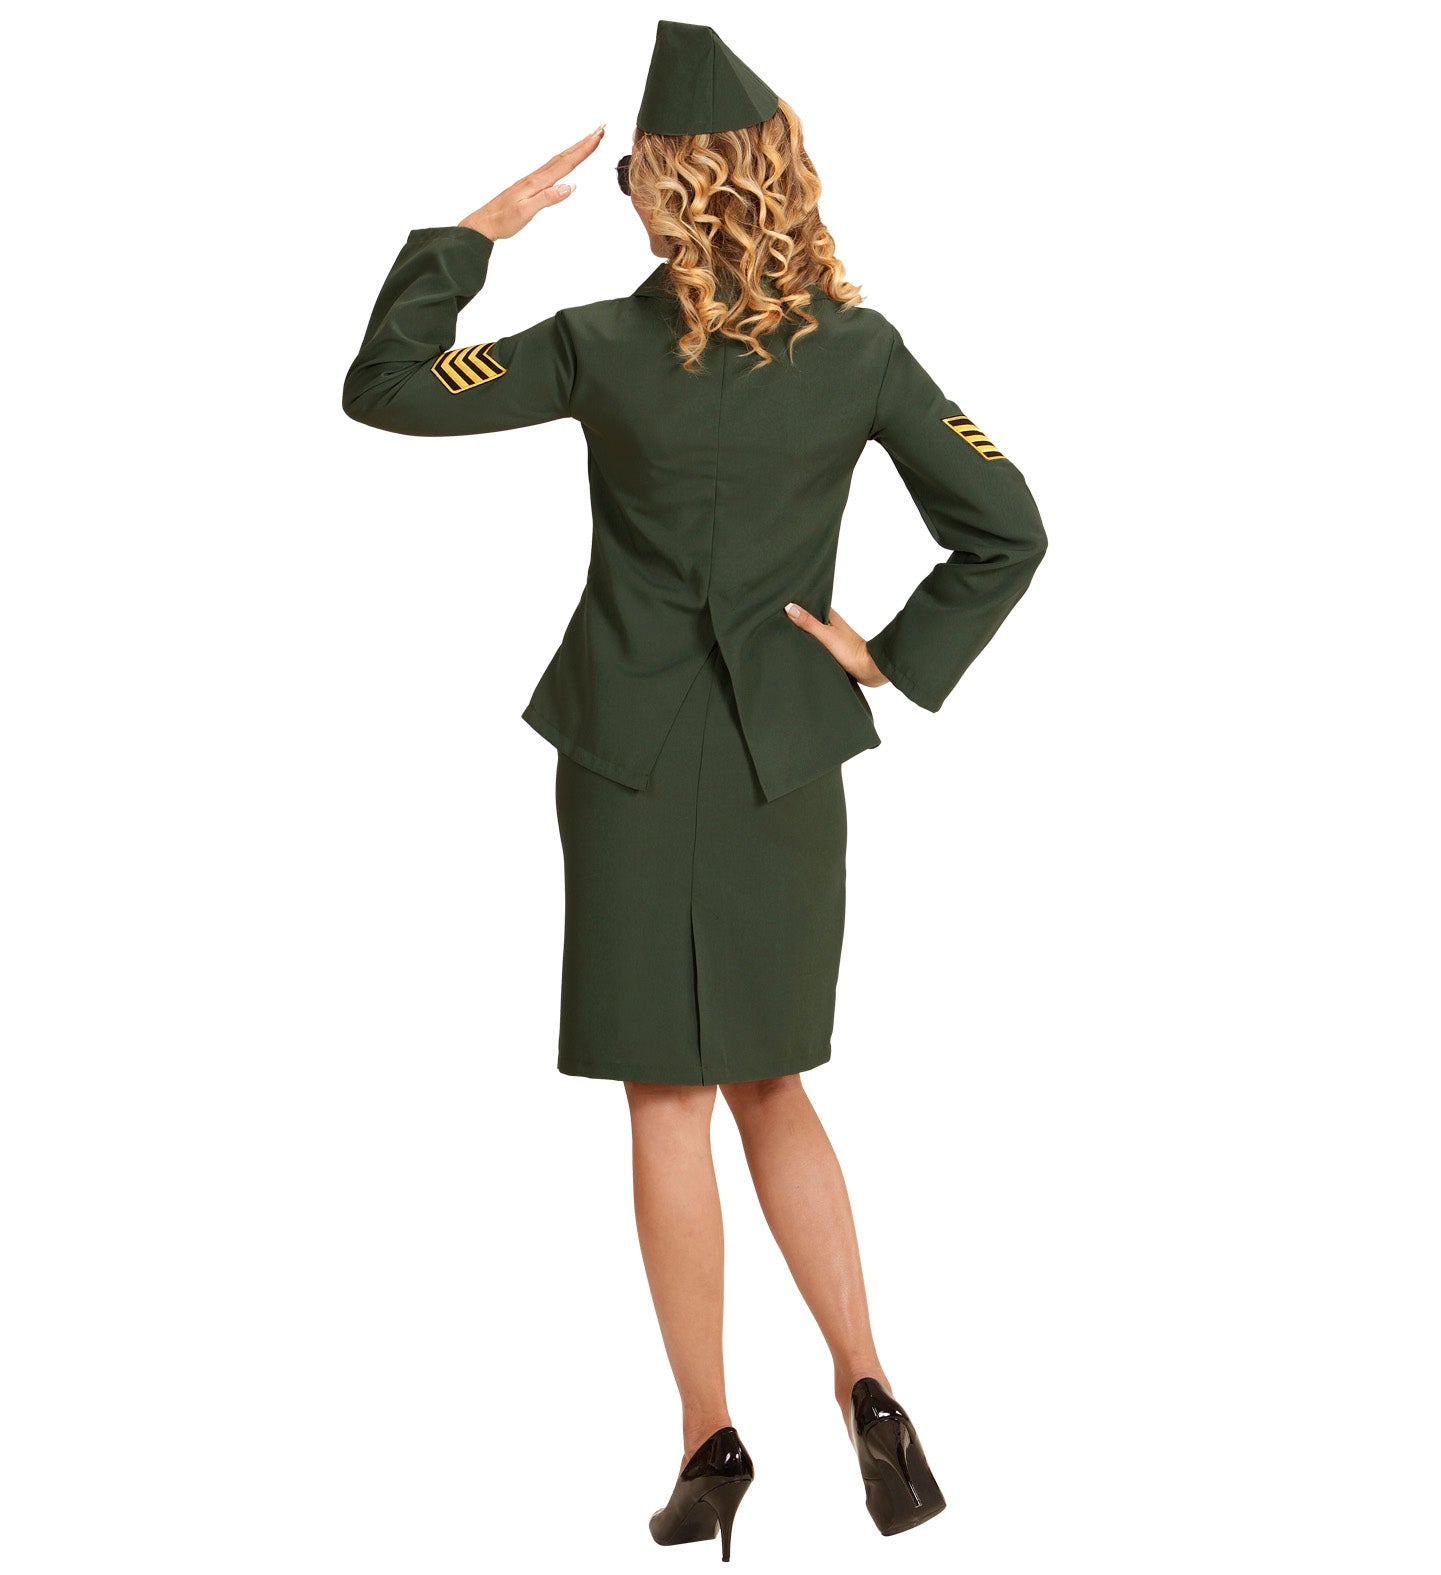 1940's Army Officer Costume Ladies